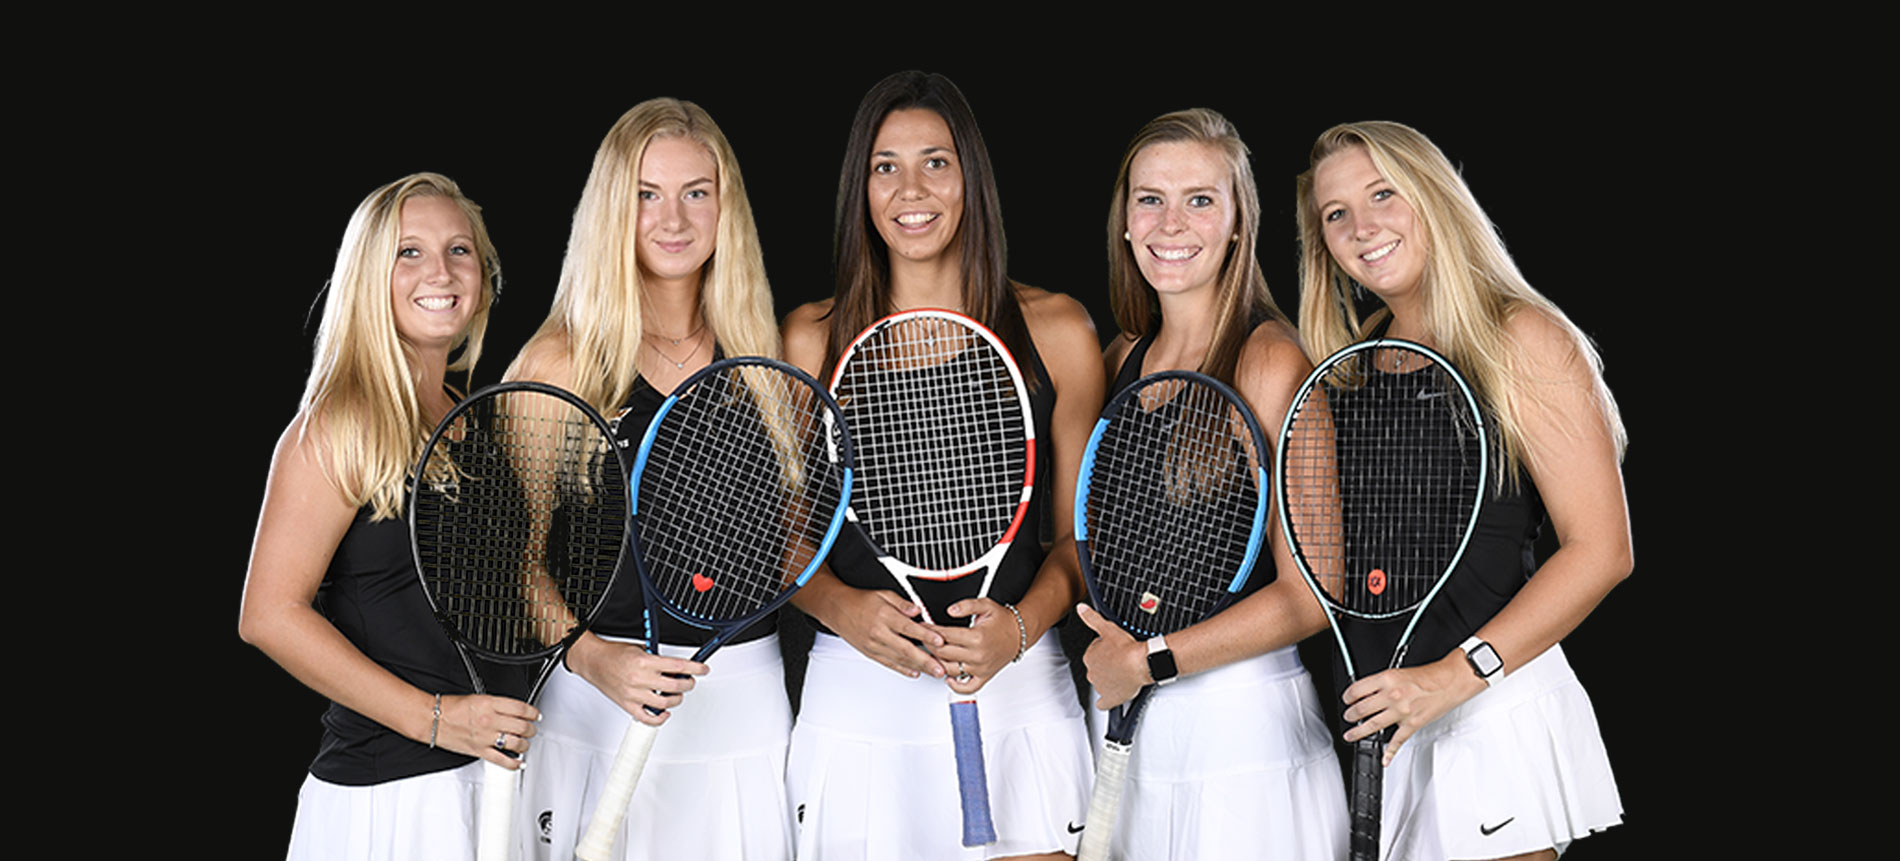 Women’s Tennis Opens 2021 Season at Home on Wednesday